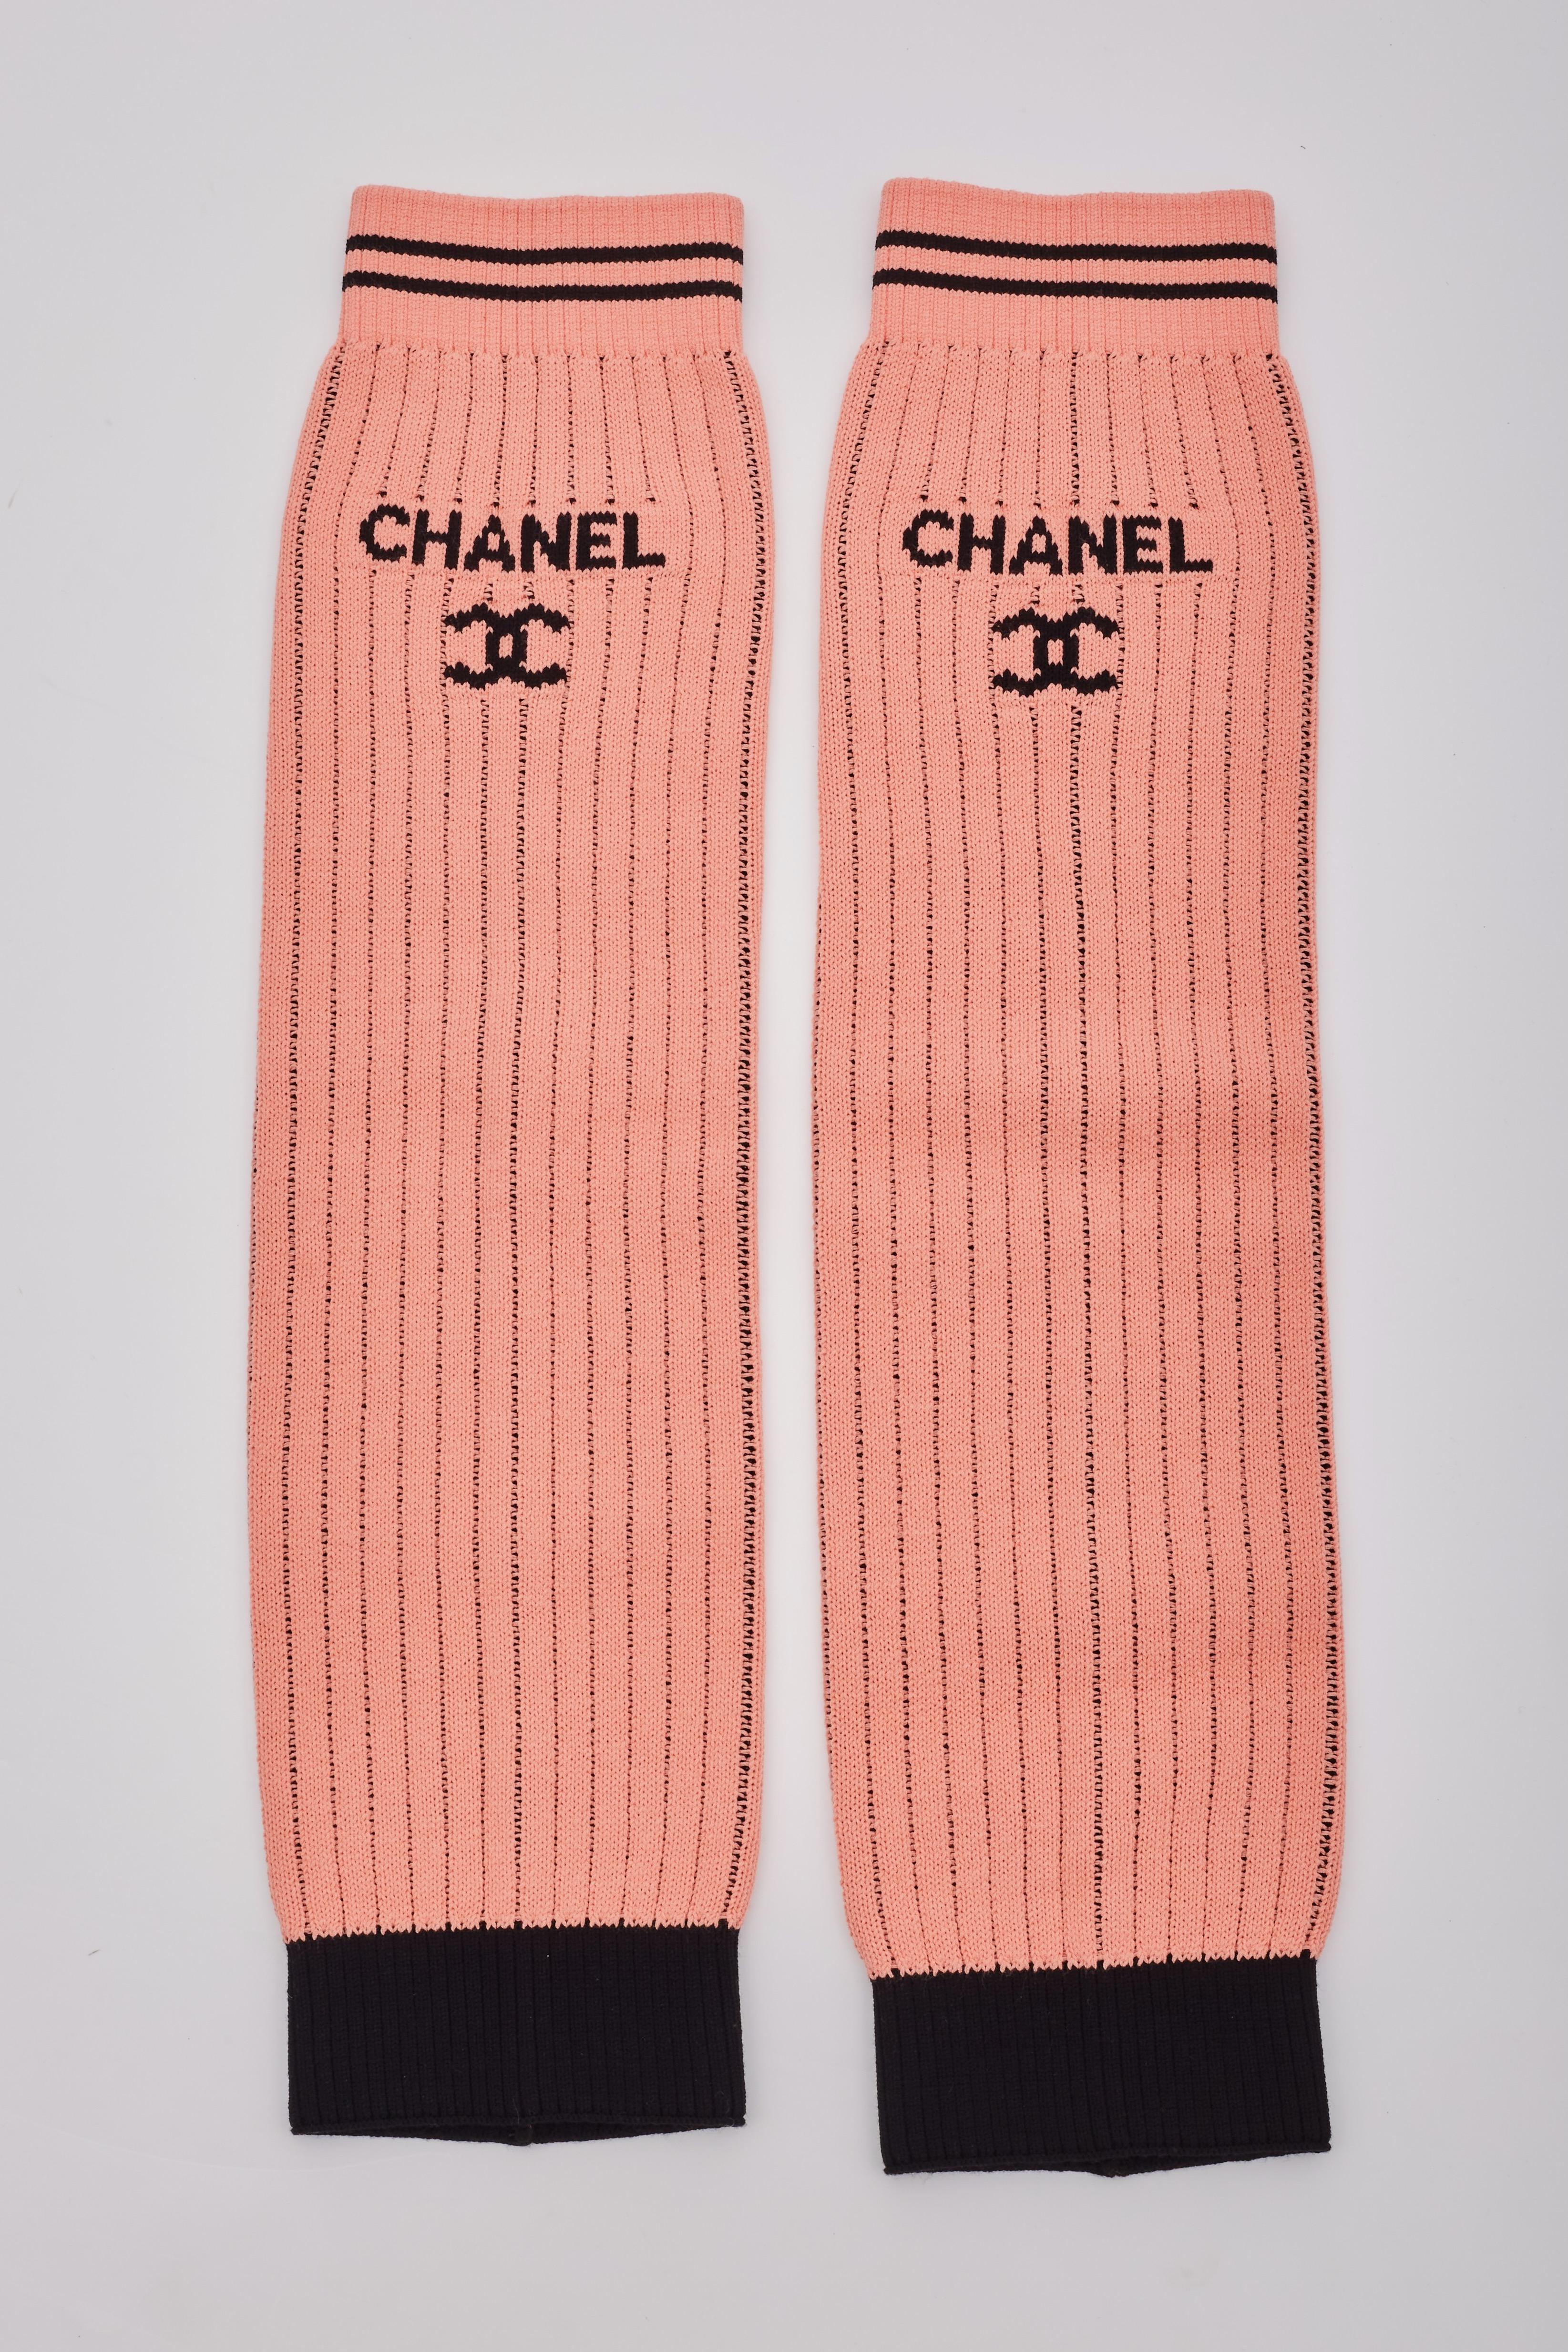 Introducing the sought-after knit Chanel Leg Warmers in apricot (coral), part of the limited-production collection from Chanel's 2024 Cruise line. This piece was featured in the LA Hollywood Cruise runway fashion show, specifically in Look 33.

53 ×